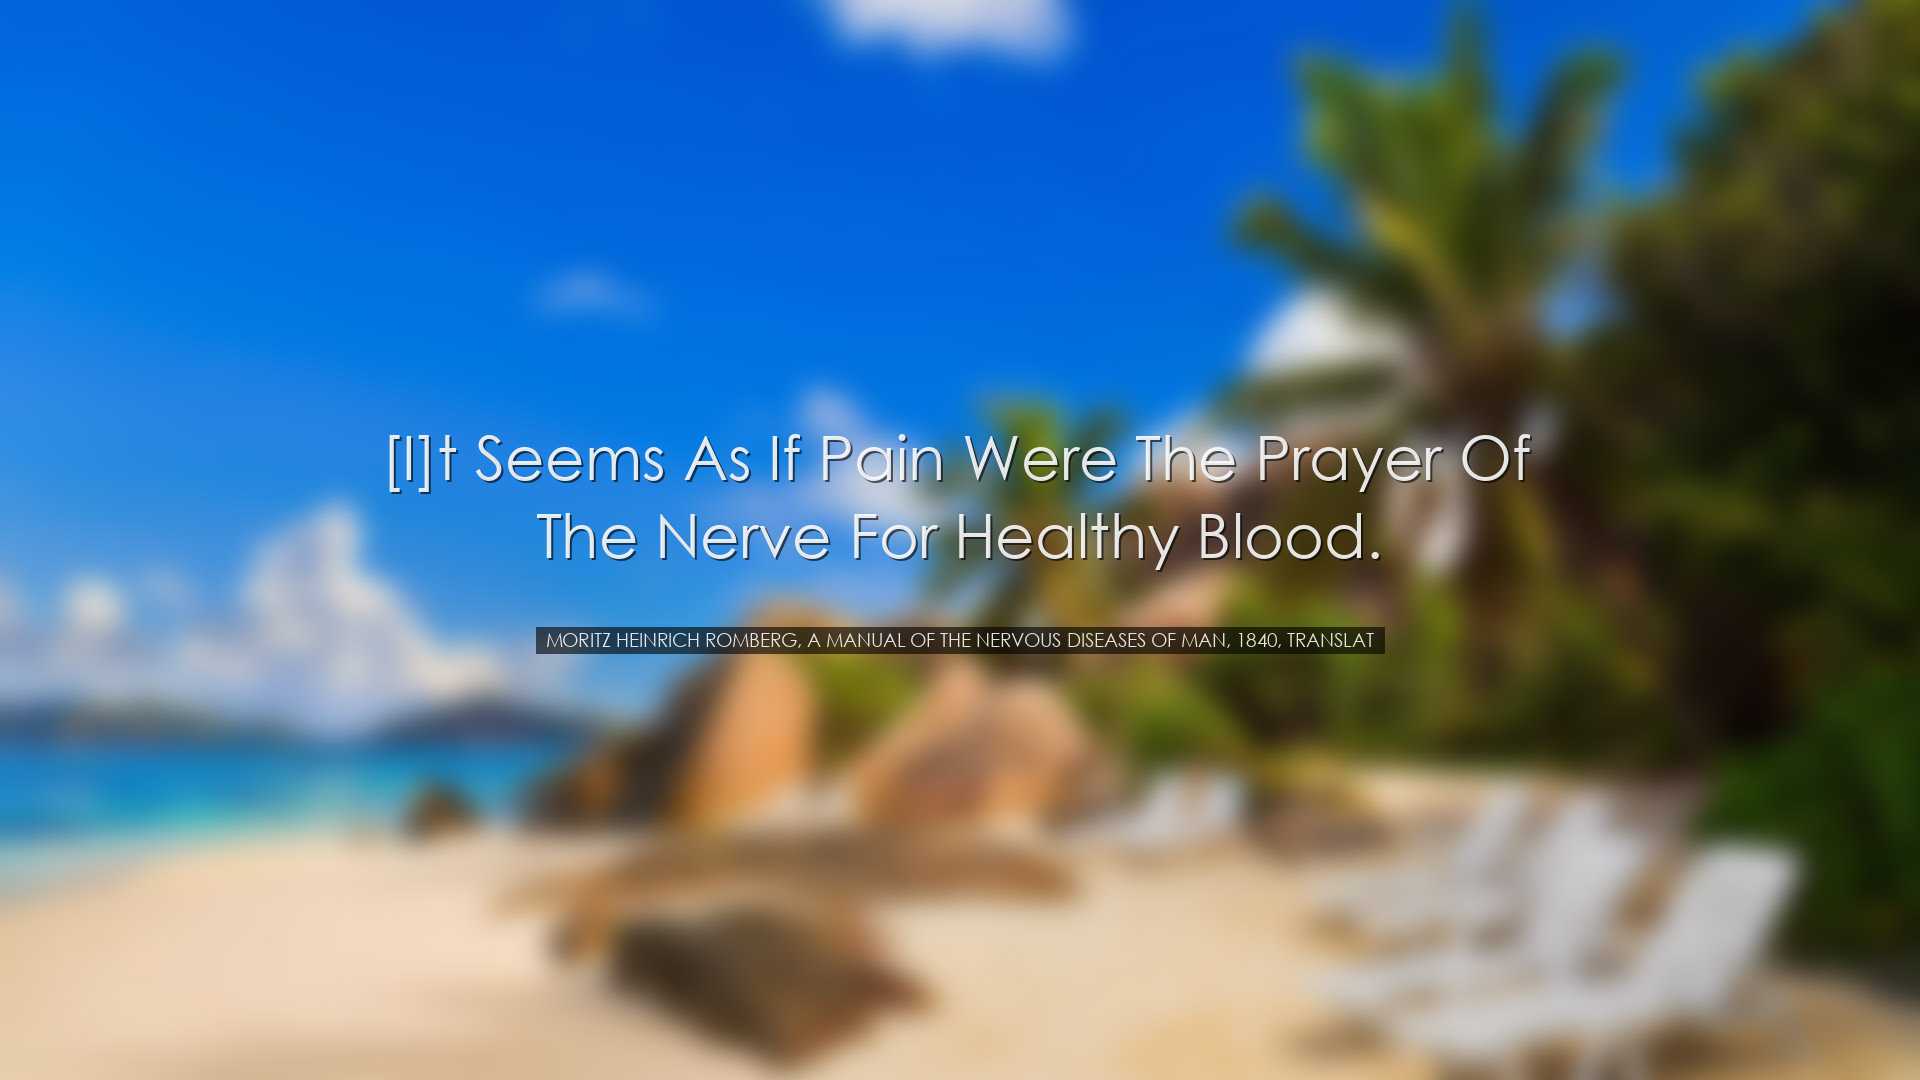 [I]t seems as if pain were the prayer of the nerve for healthy blo